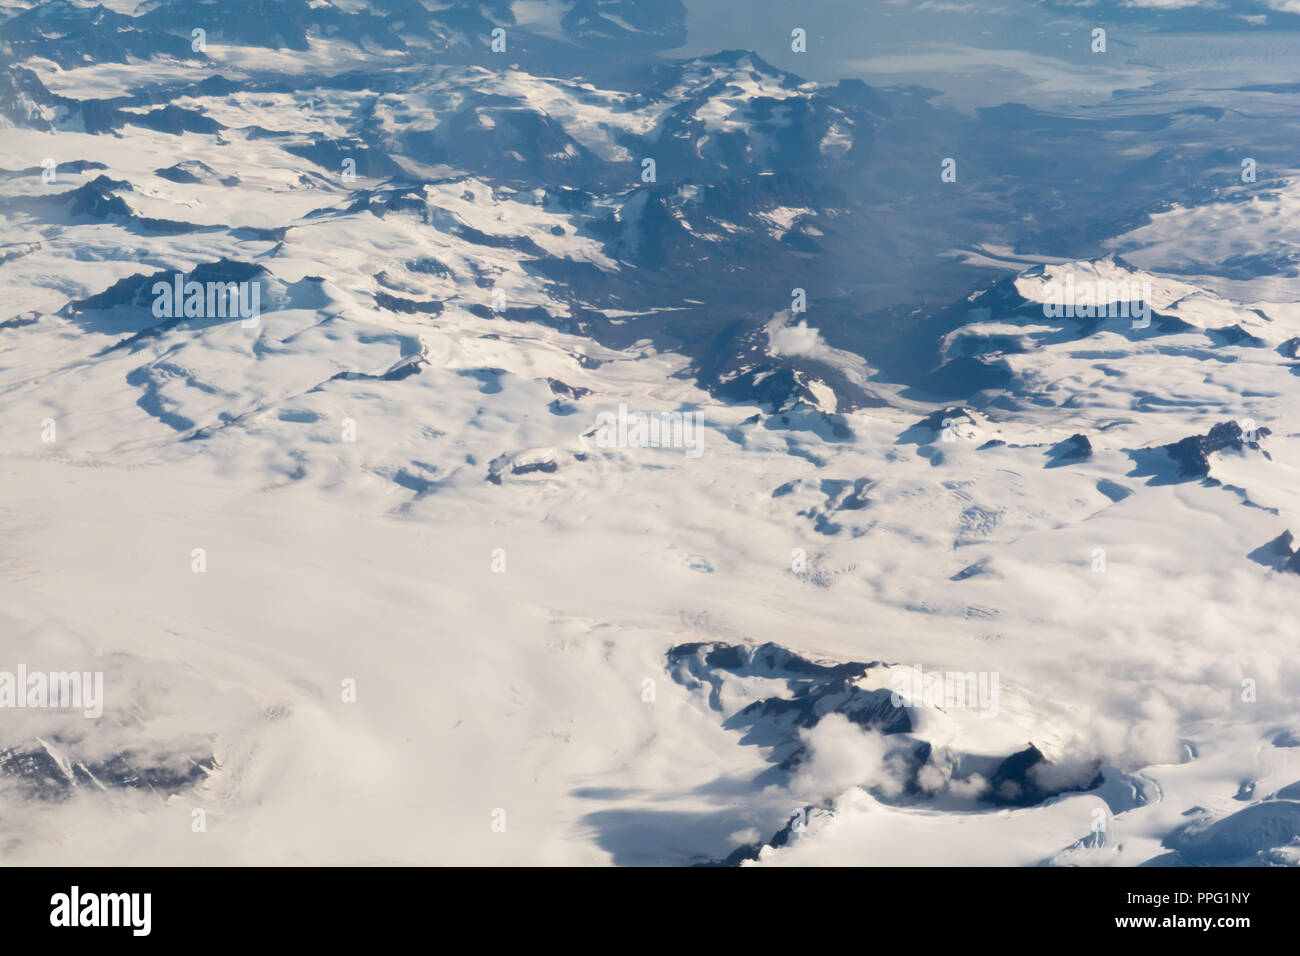 Ariel view of a snow covered mountain range Stock Photo